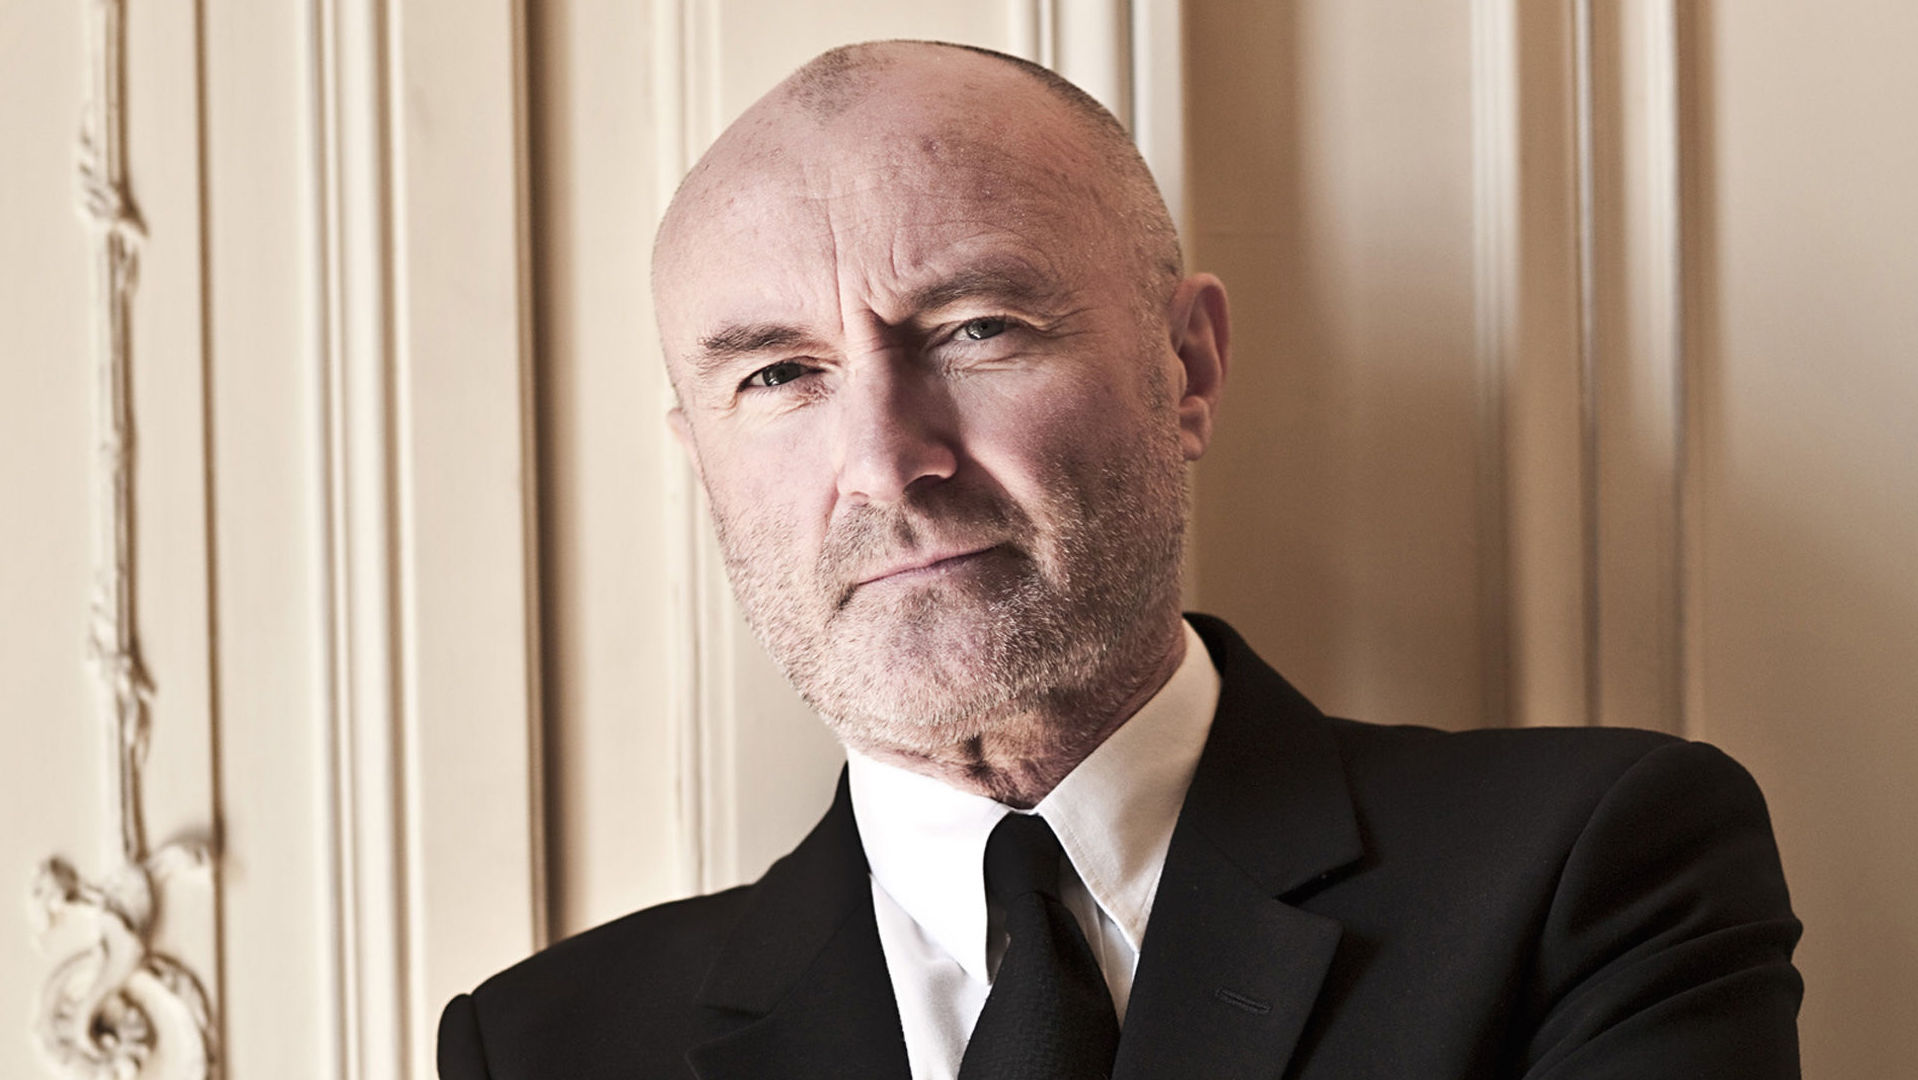 Phil Collins tocó “In The Air Tonight” junto a The Roots en The Tonight Show. Cúsica Plus